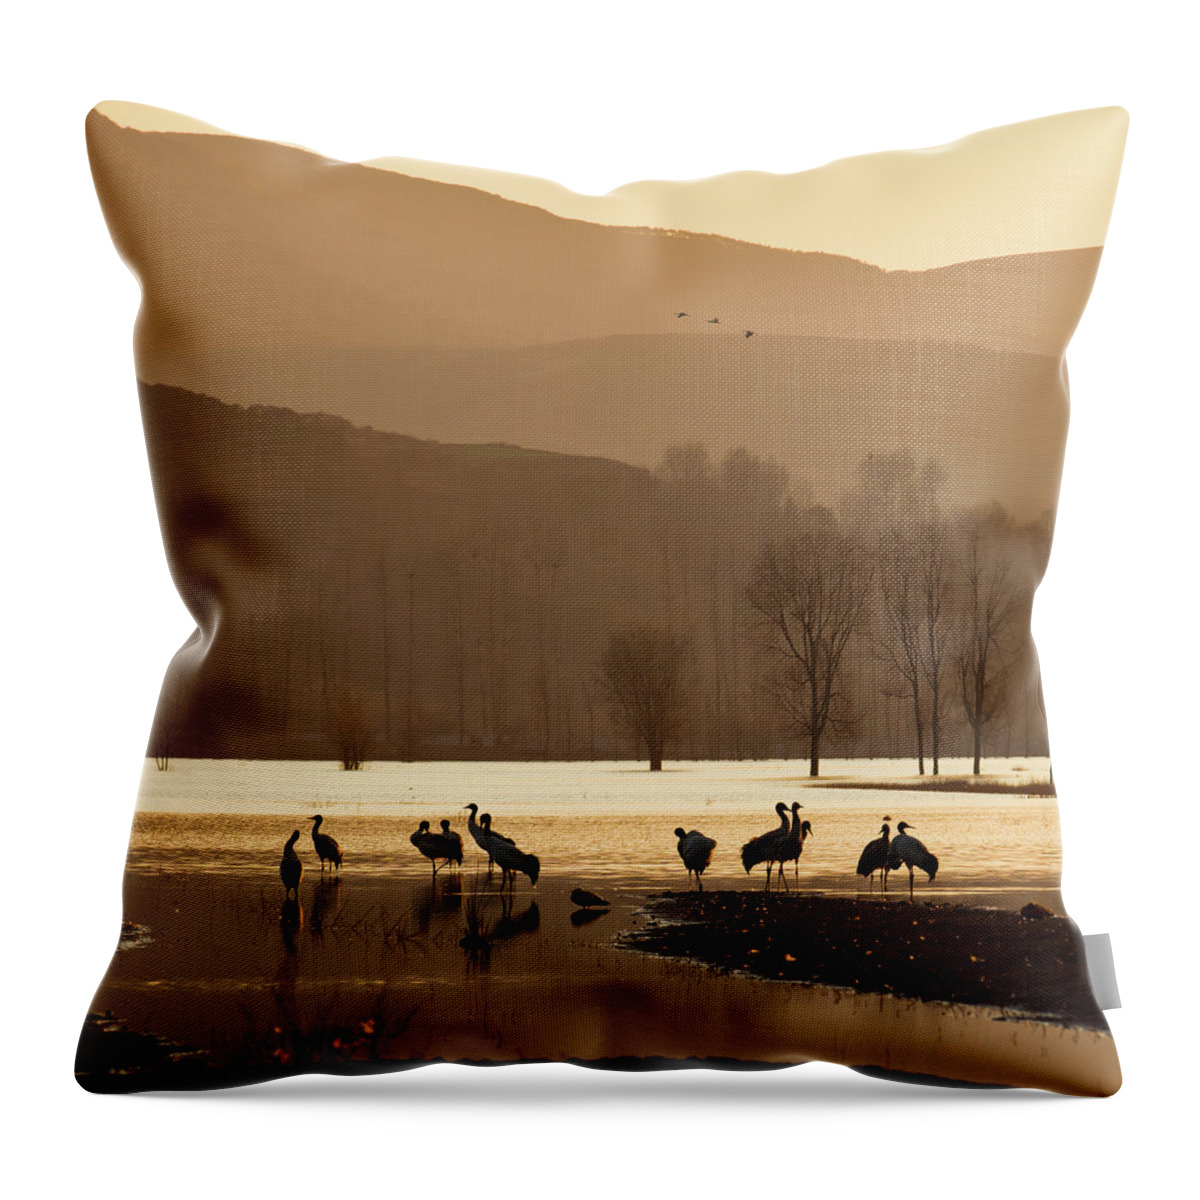 Animal Themes Throw Pillow featuring the photograph Black-necked Cranes by Zhouyousifang